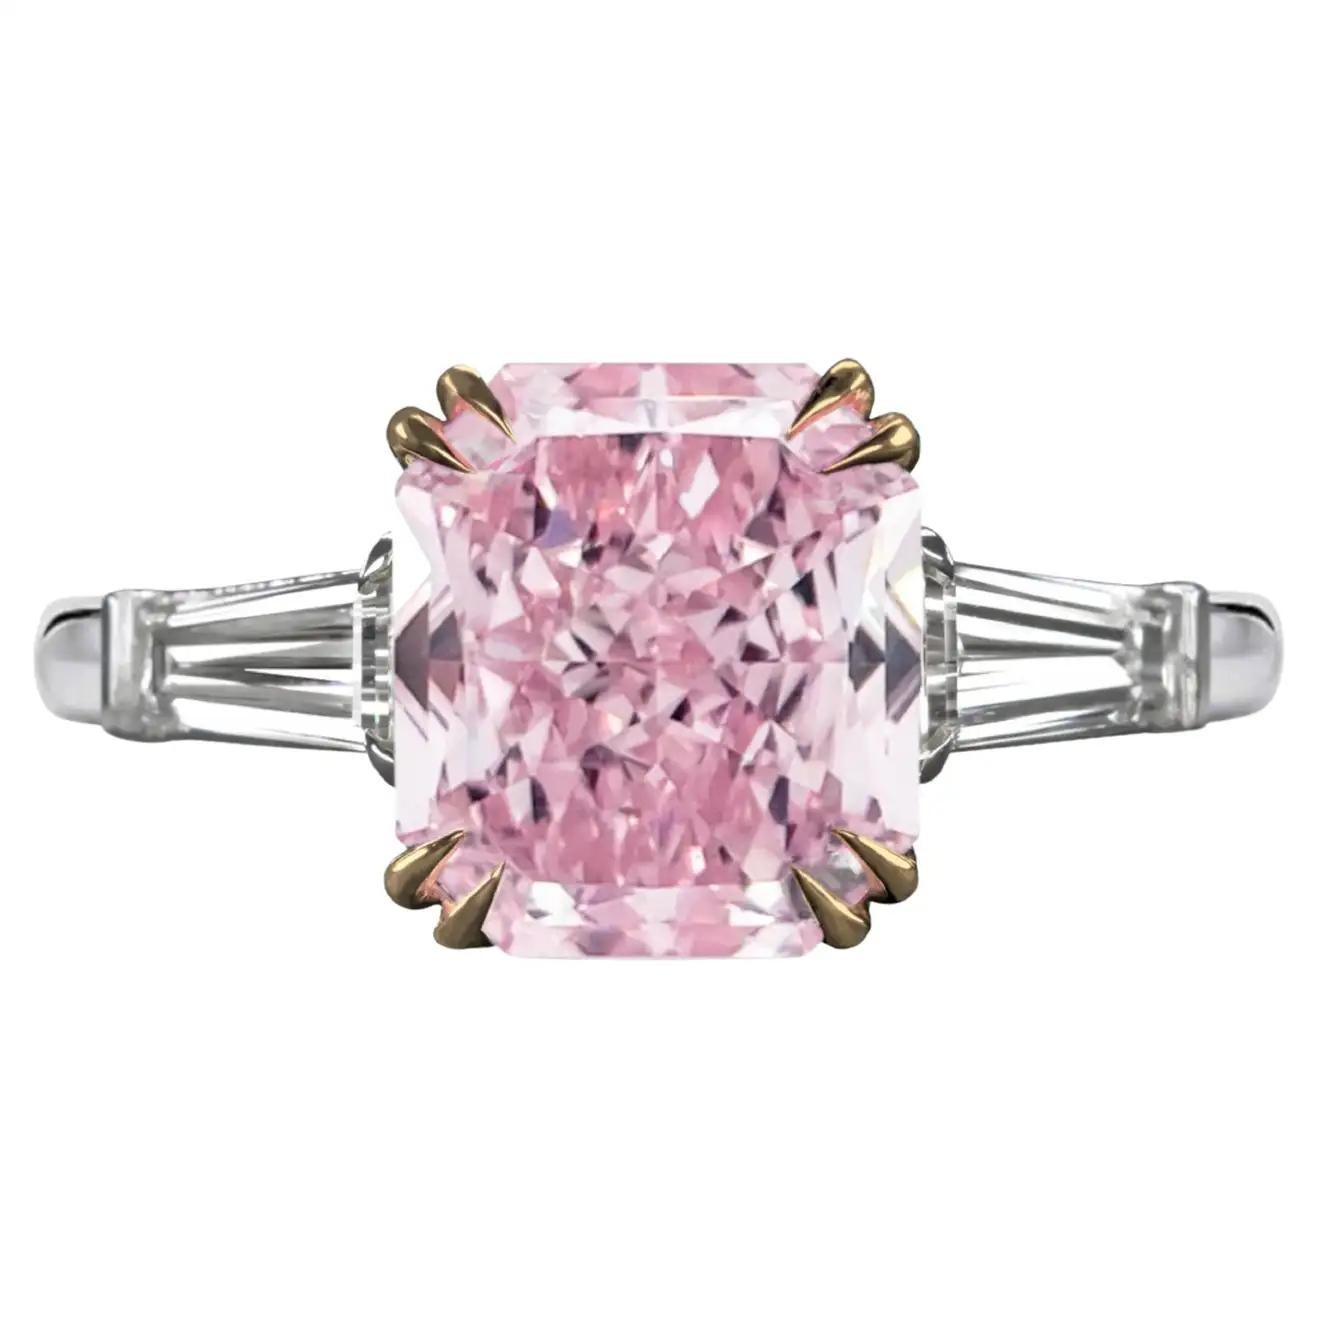 exceptional gia certified 6 carat fancy pink diamond flawless clarity solitaire